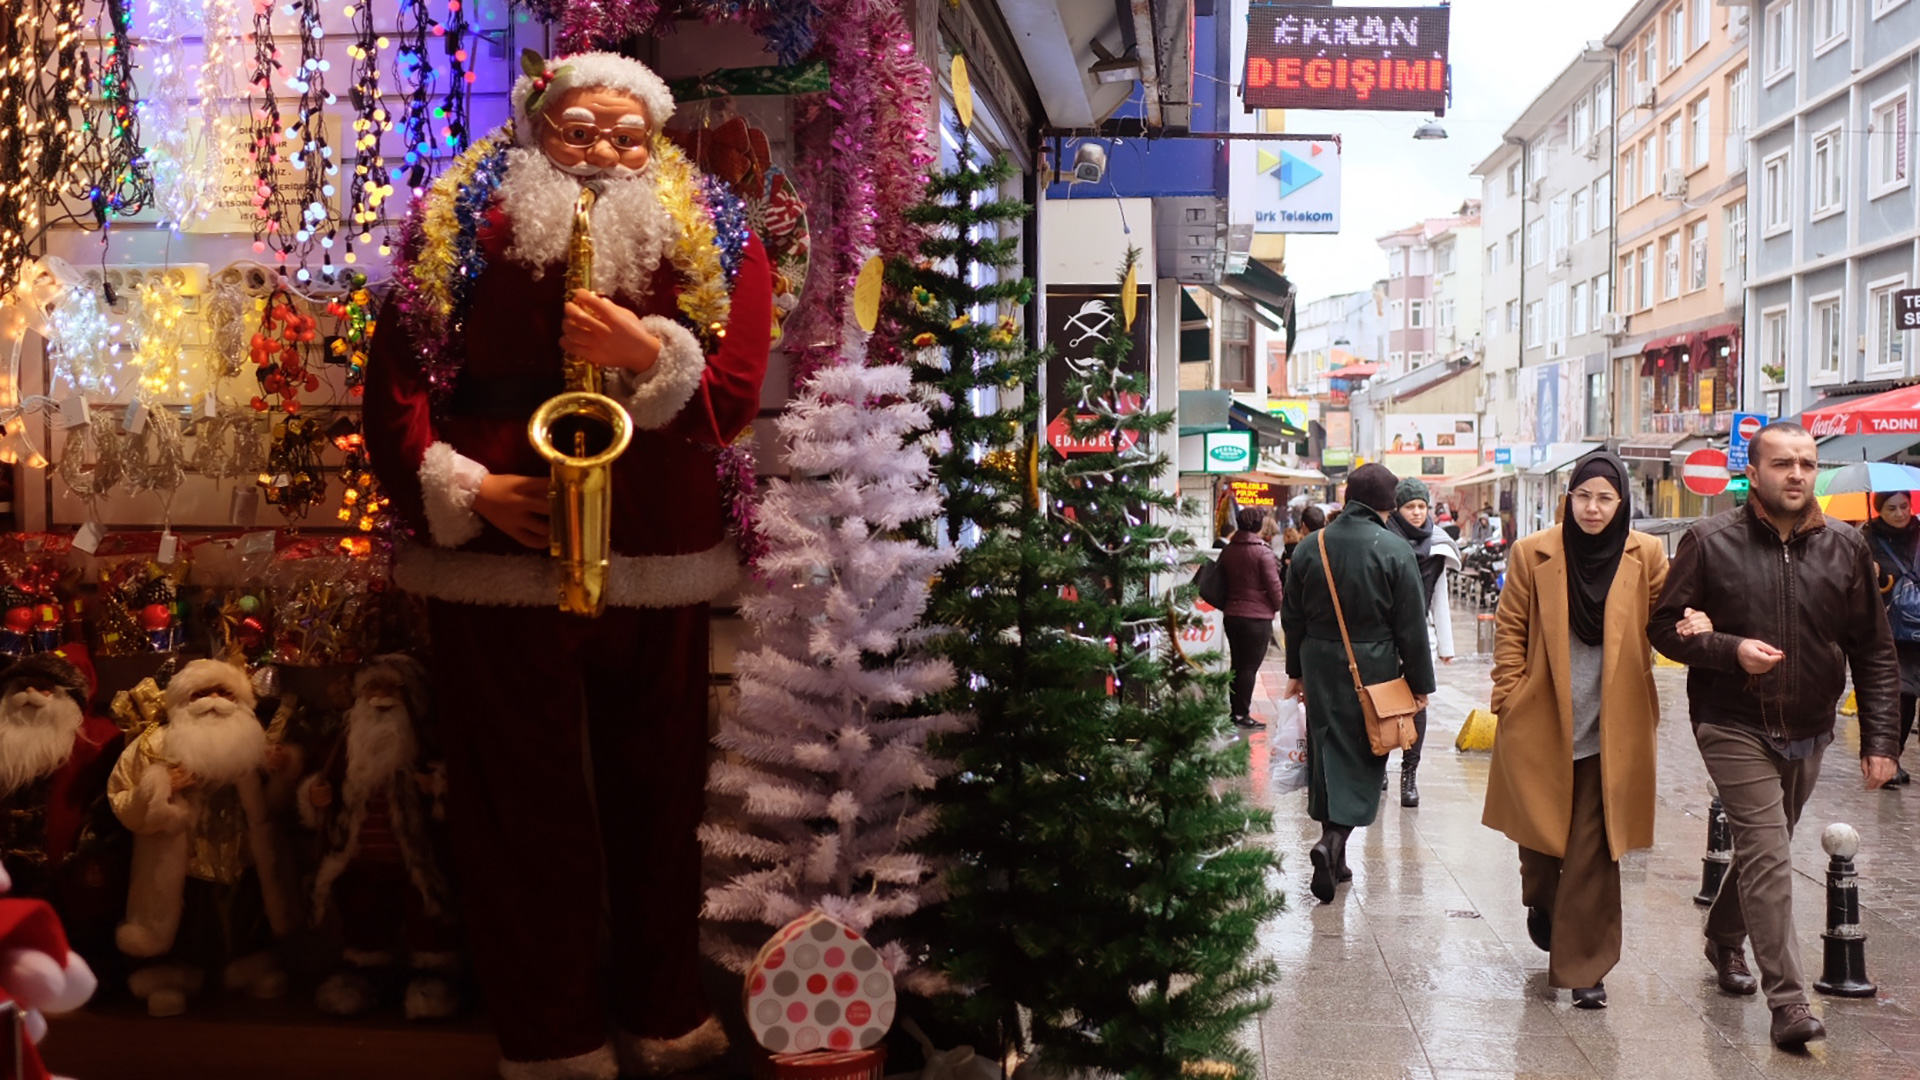 Pedestrians stroll by a storefront in Turkey displaying New Year's decorations.